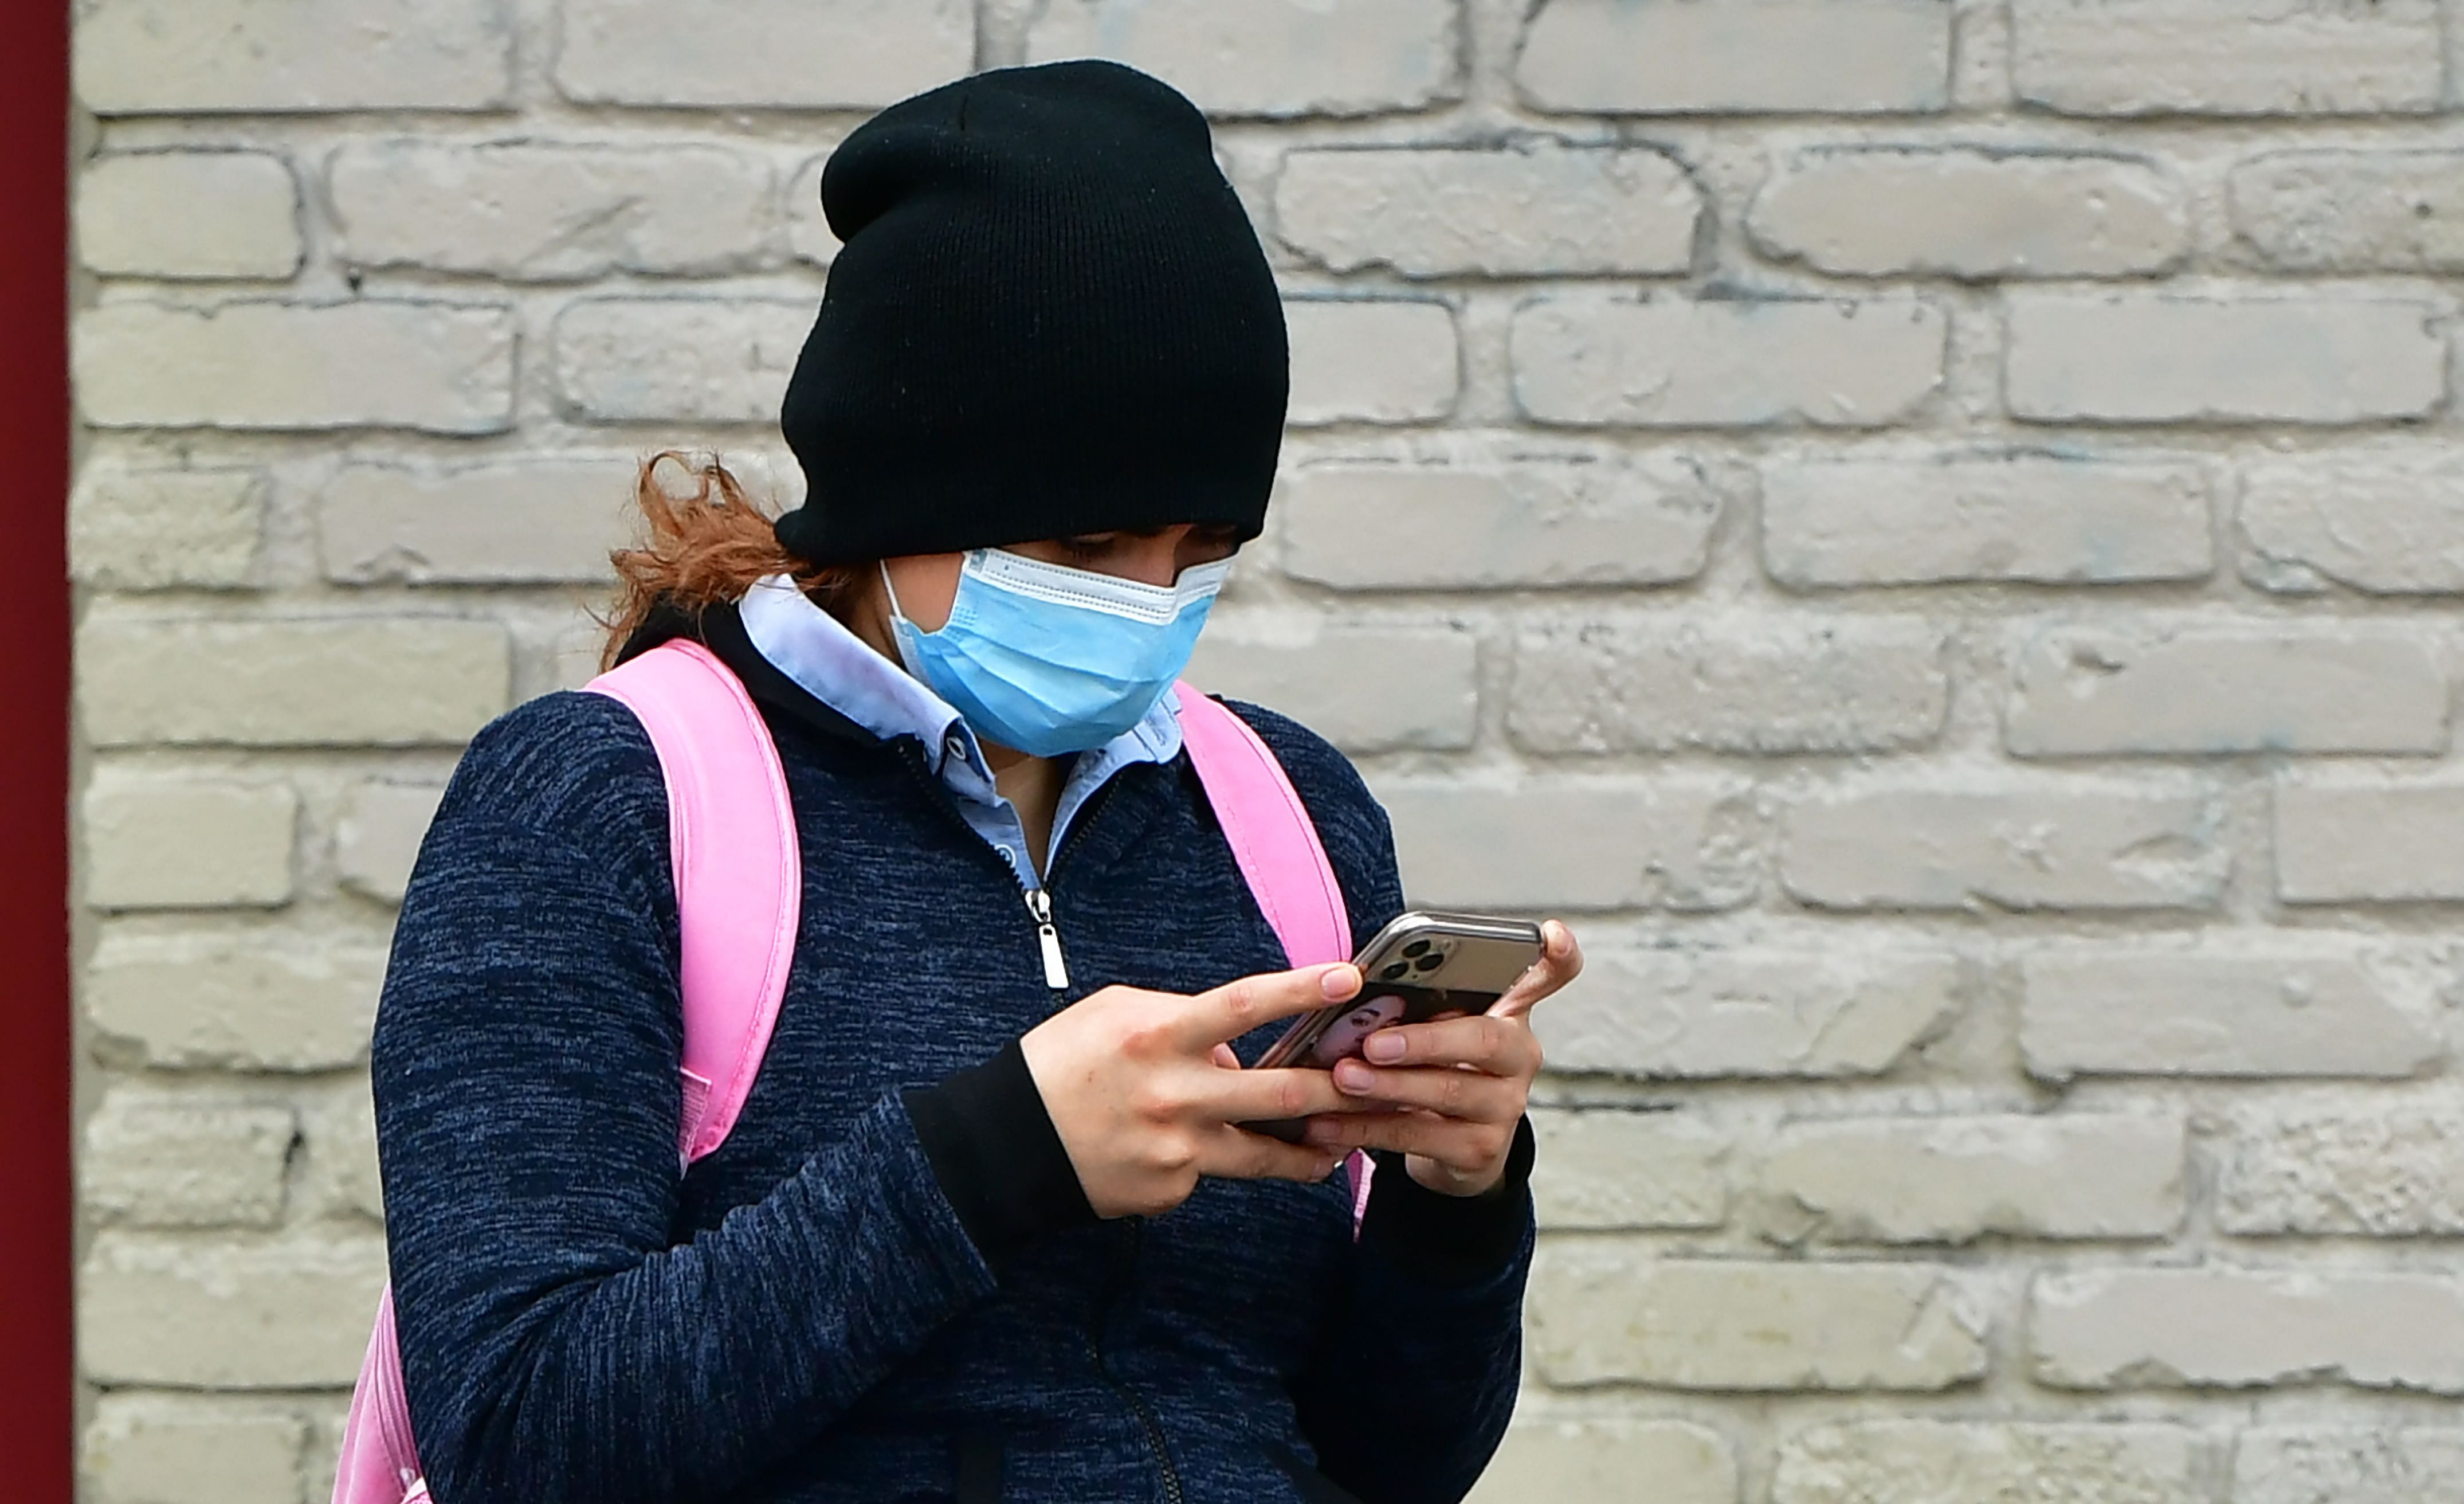 A woman wears a face mask while checking her cellphone in Los Angeles. (Credit: AFP Photo)